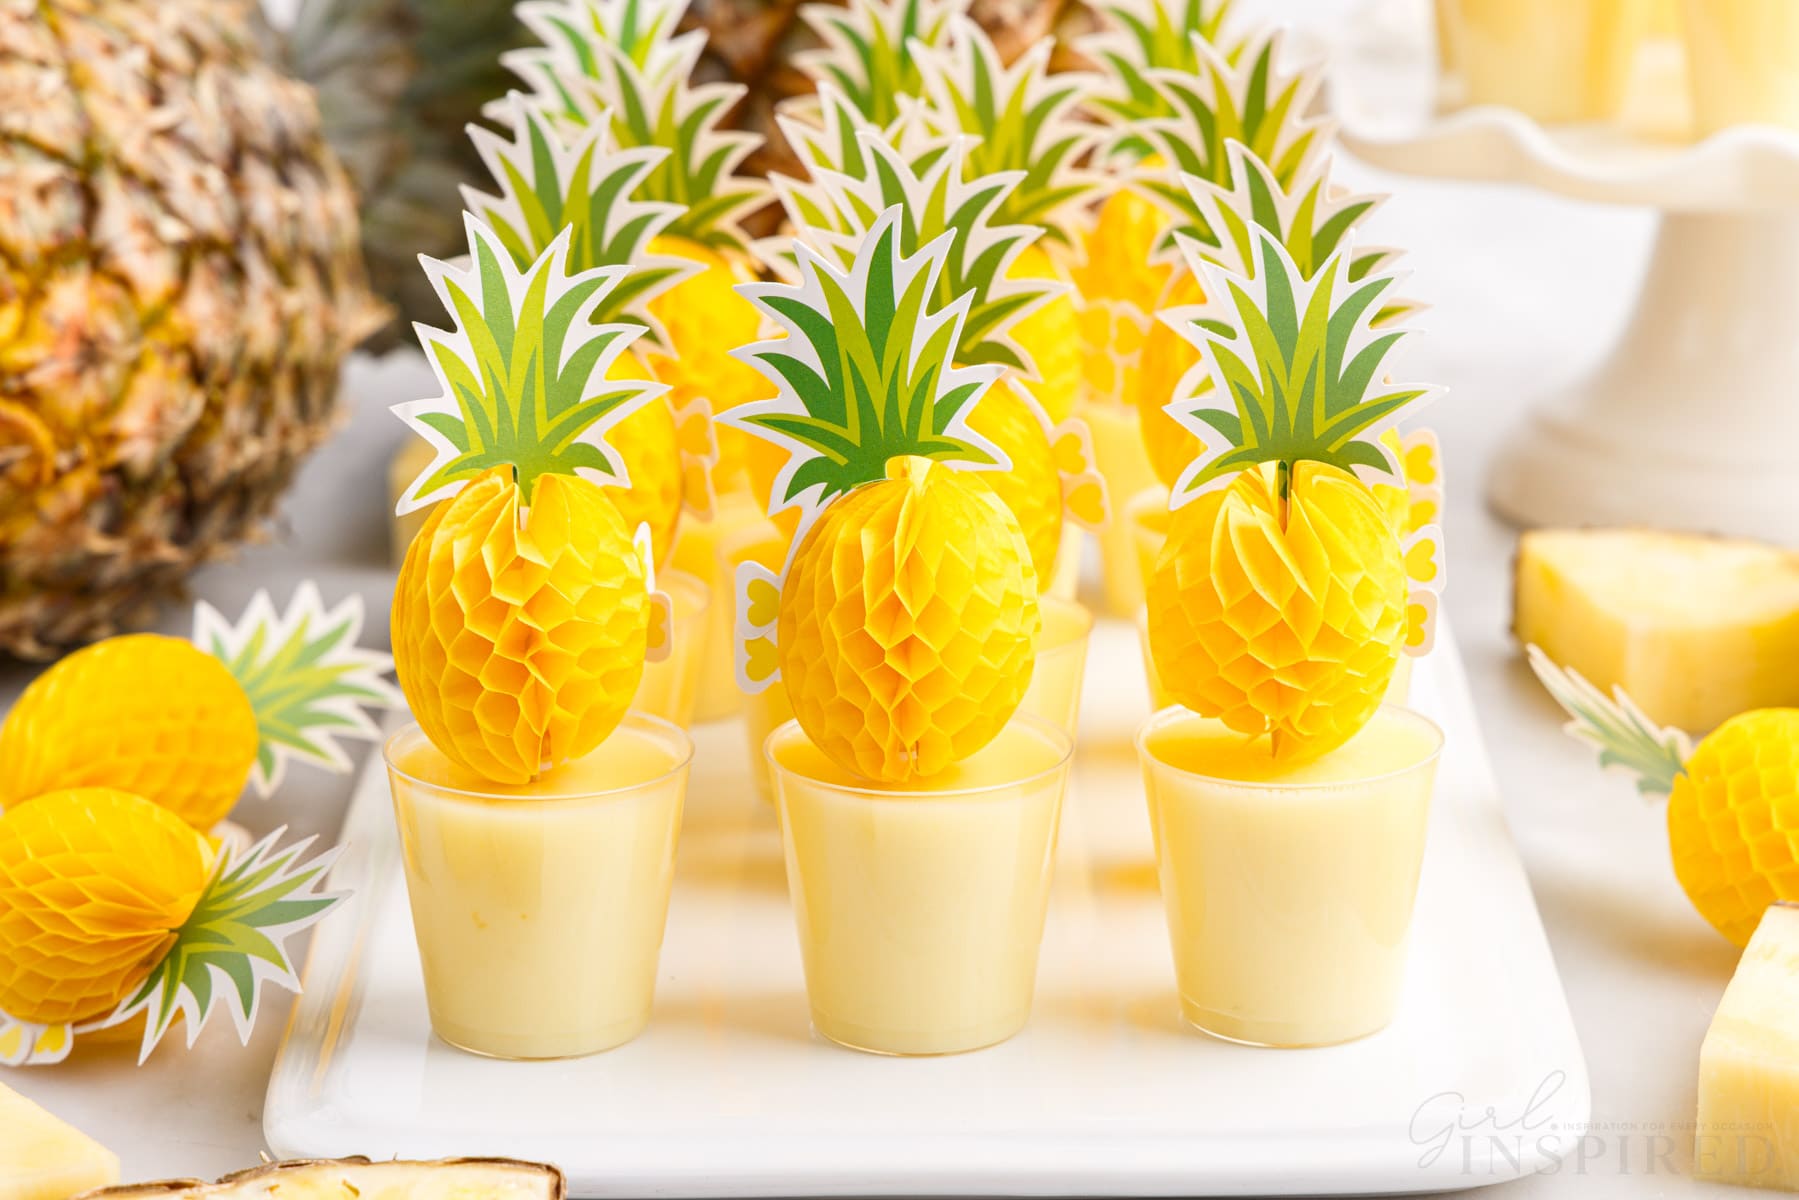 dole whip jello shots on a serving tray next to a whole pineapple